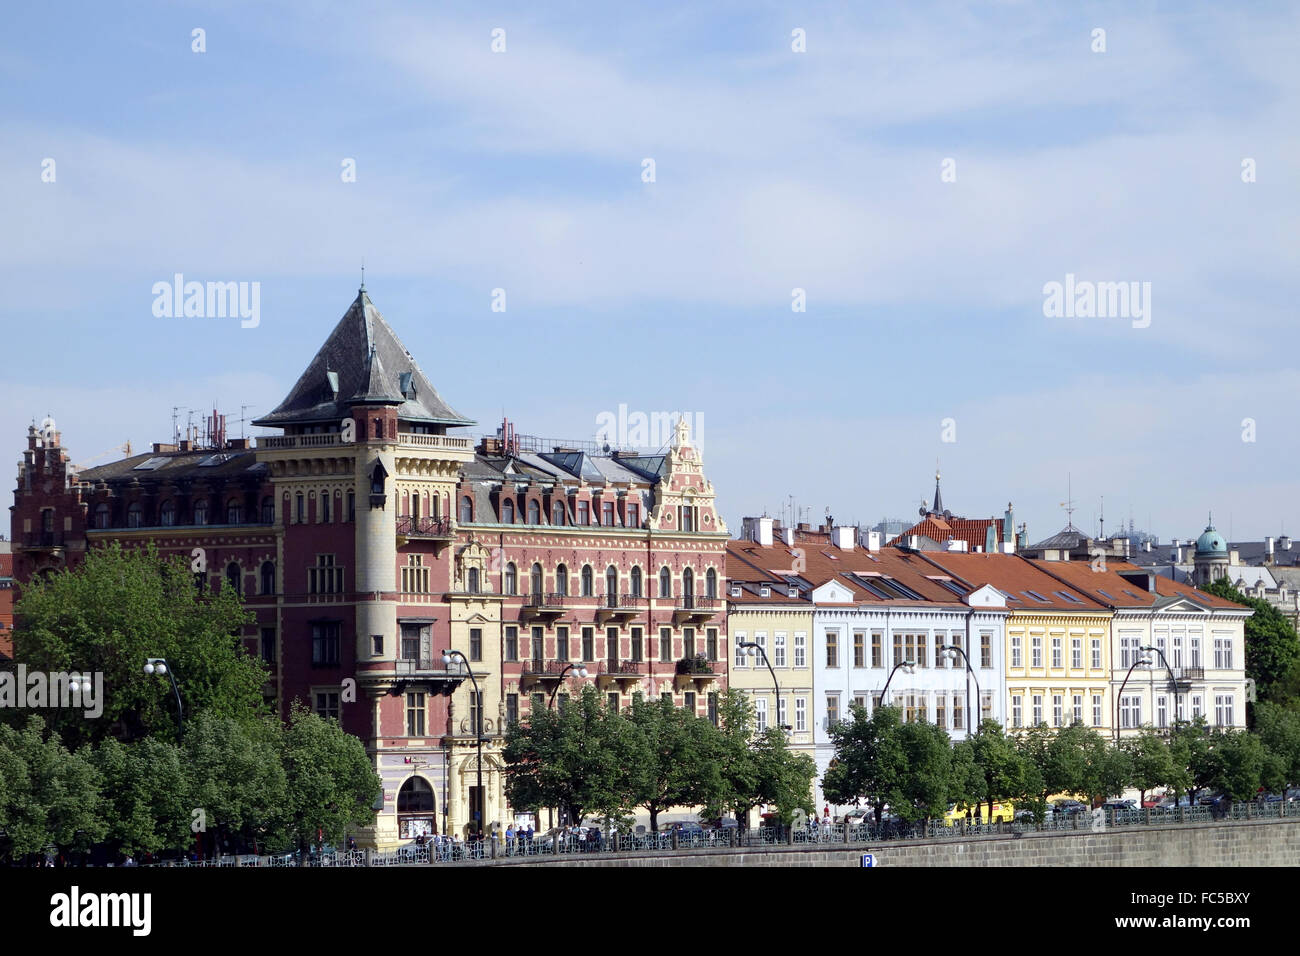 ague the Golden City of a Hundred Spires Stock Photo